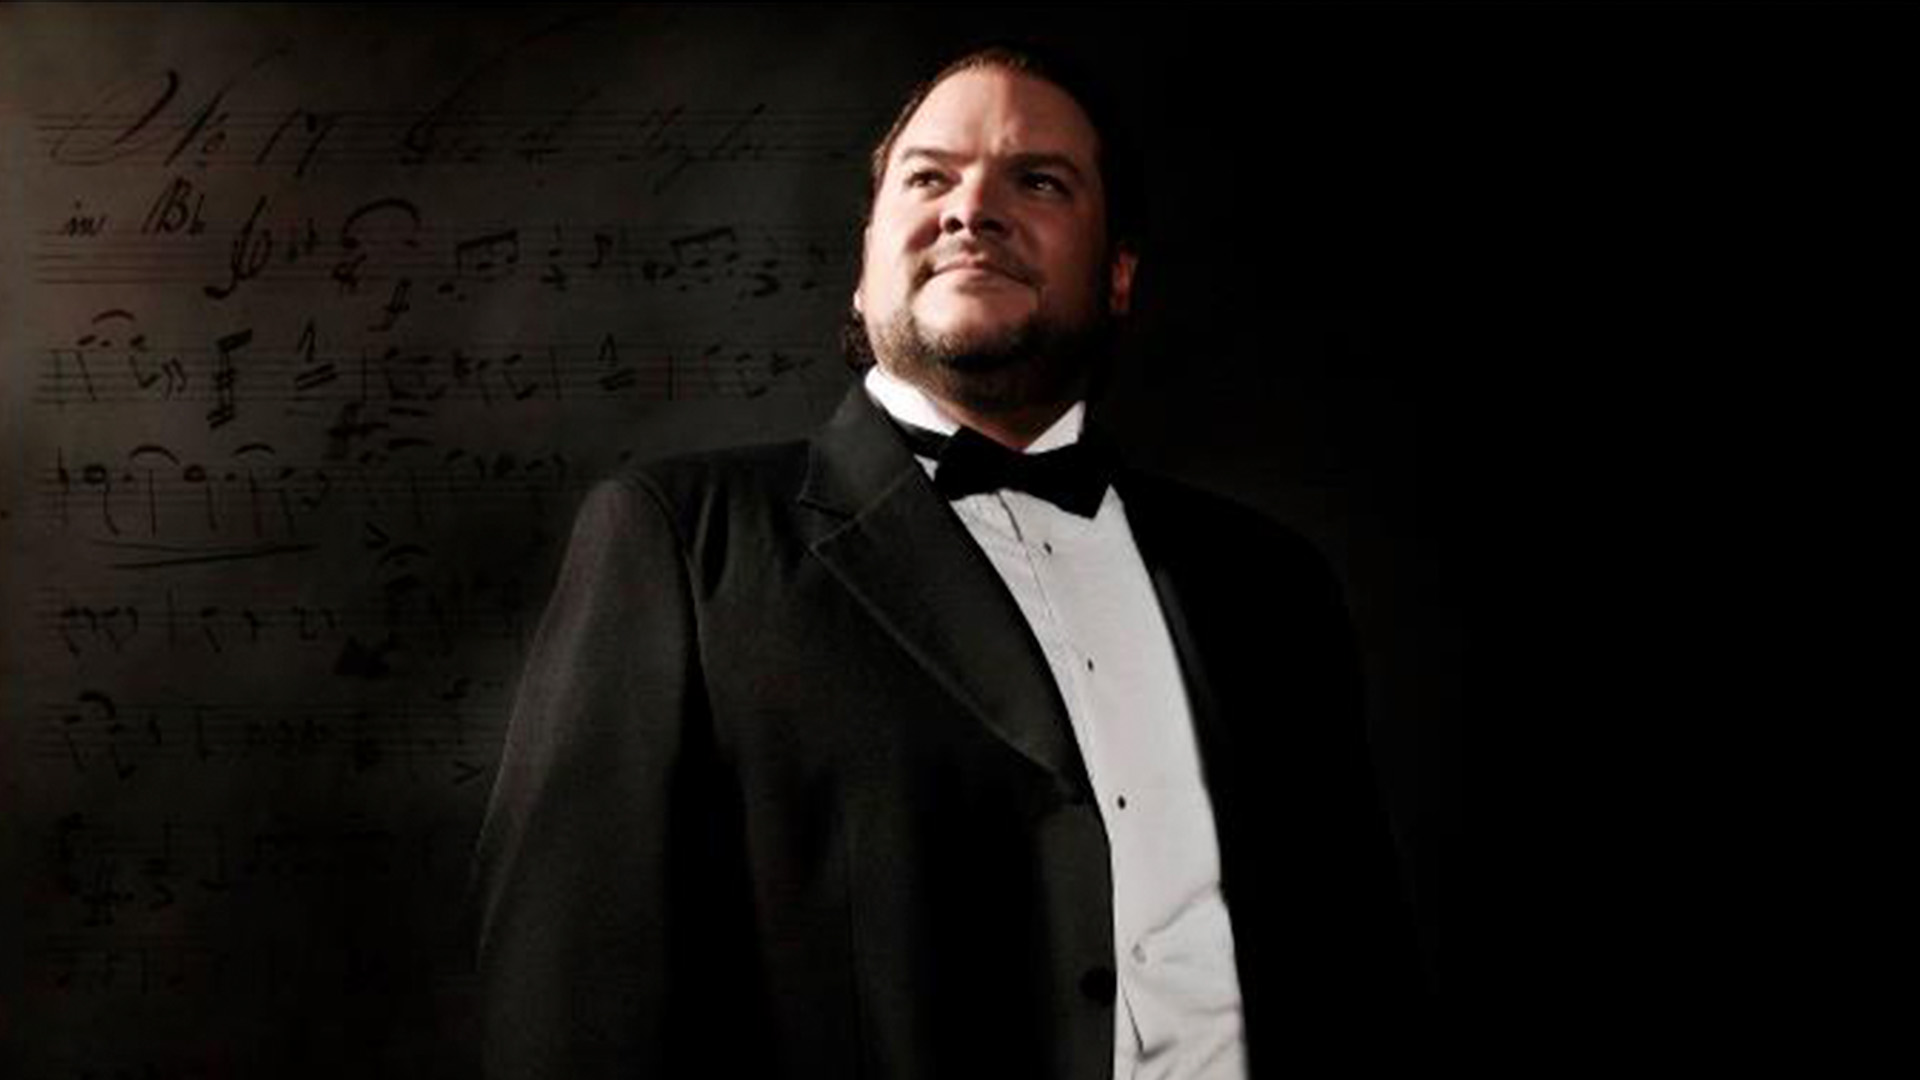 The tenor Duilio Smiriglia will present pieces by Beethoven and Tchaikovsky, accompanied by the Kayen orchestra, from Río Grande